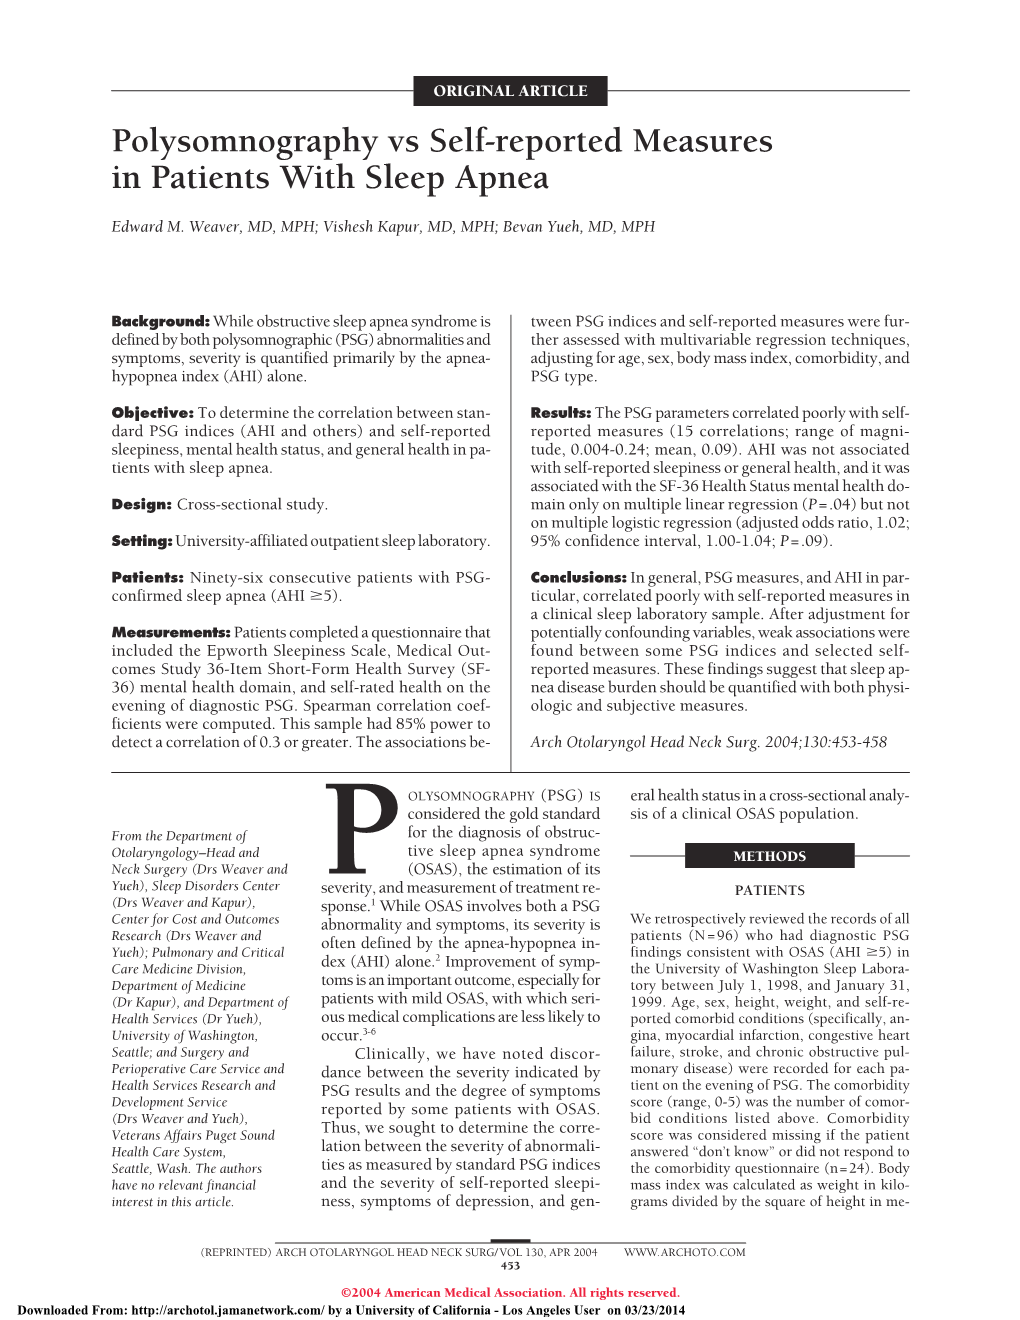 Polysomnography Vs Self-Reported Measures in Patients with Sleep Apnea